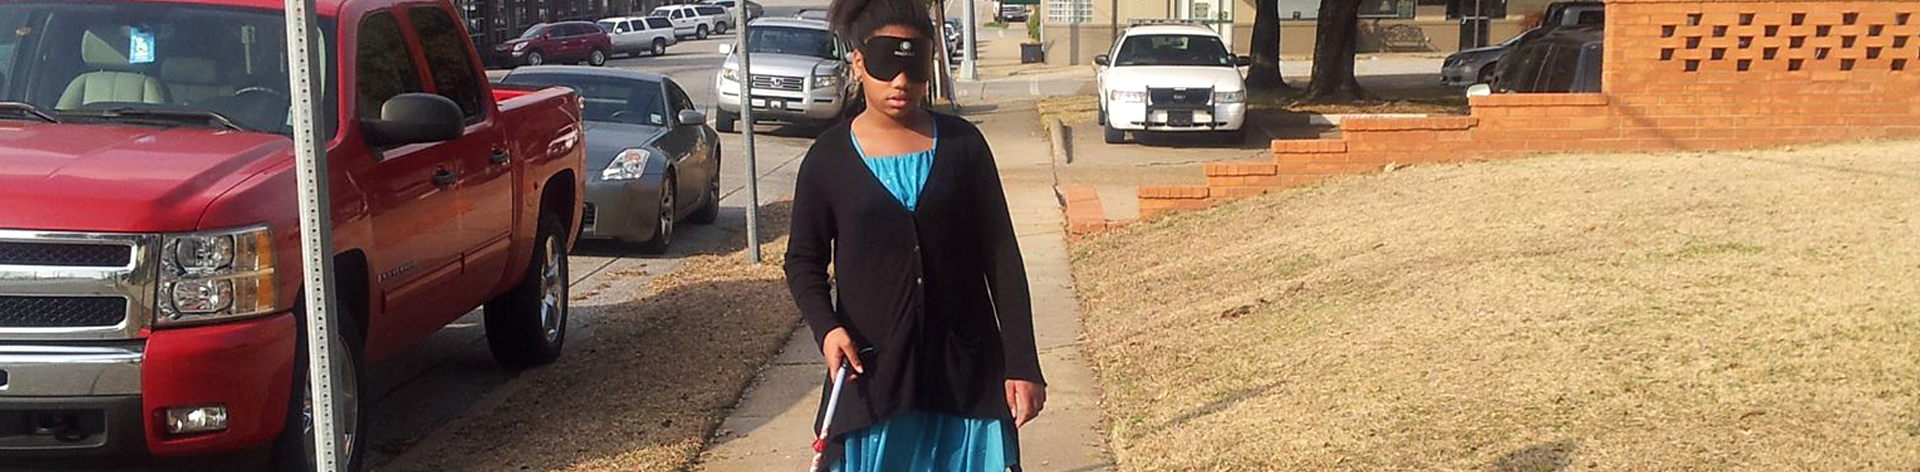 Malayja traveling confidently with her cane in downtown Ruston.